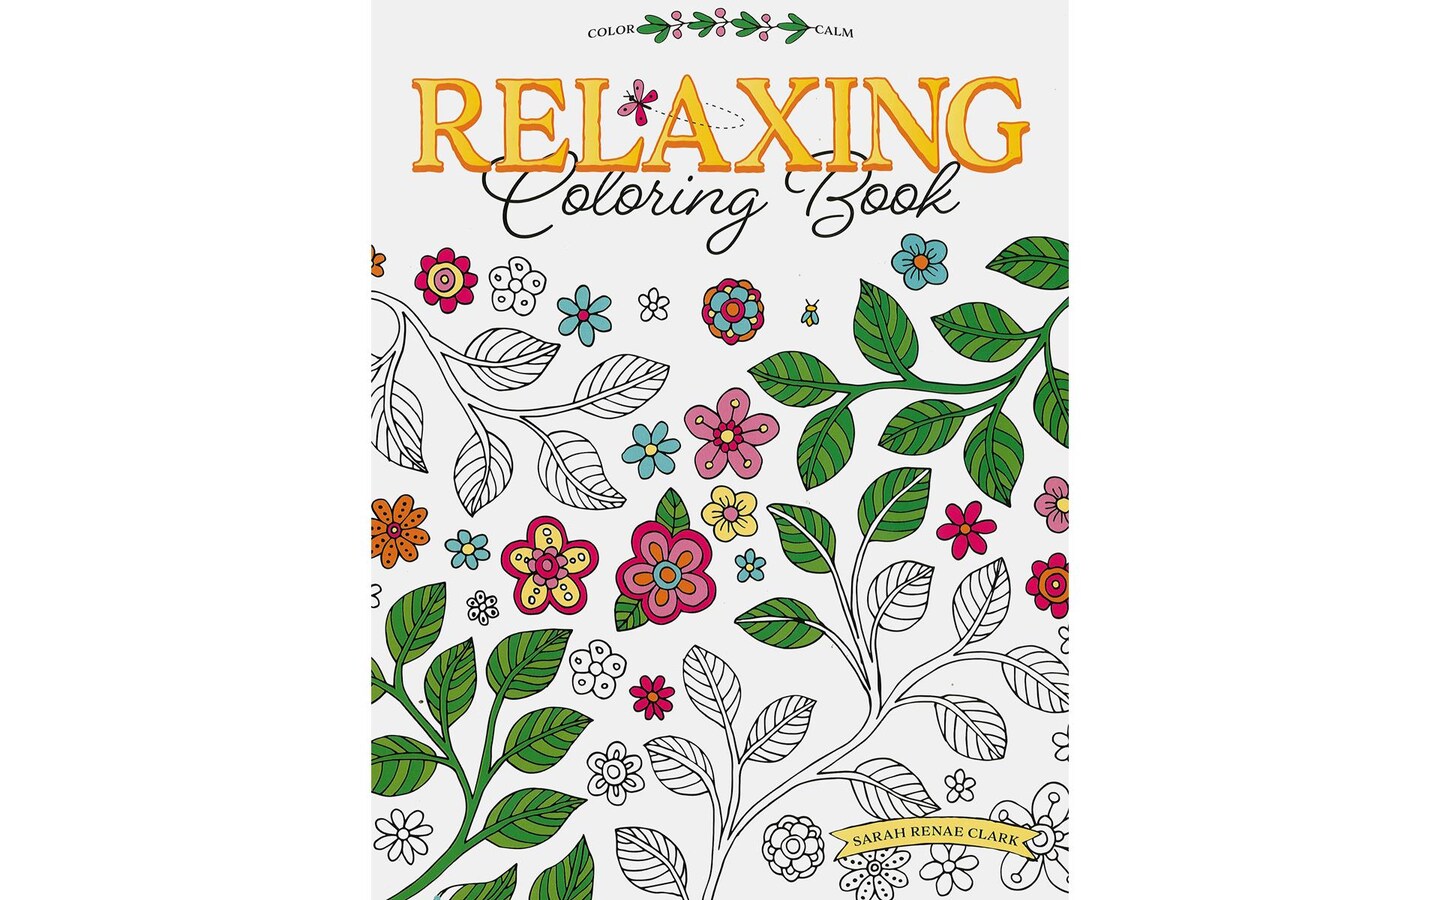 Leisure Arts The Best of Color Art For Everyone Adult Coloring Book for  Women and Men, 8.5 x 10.75 - Over 90 Designs - Stress Relieving Adult